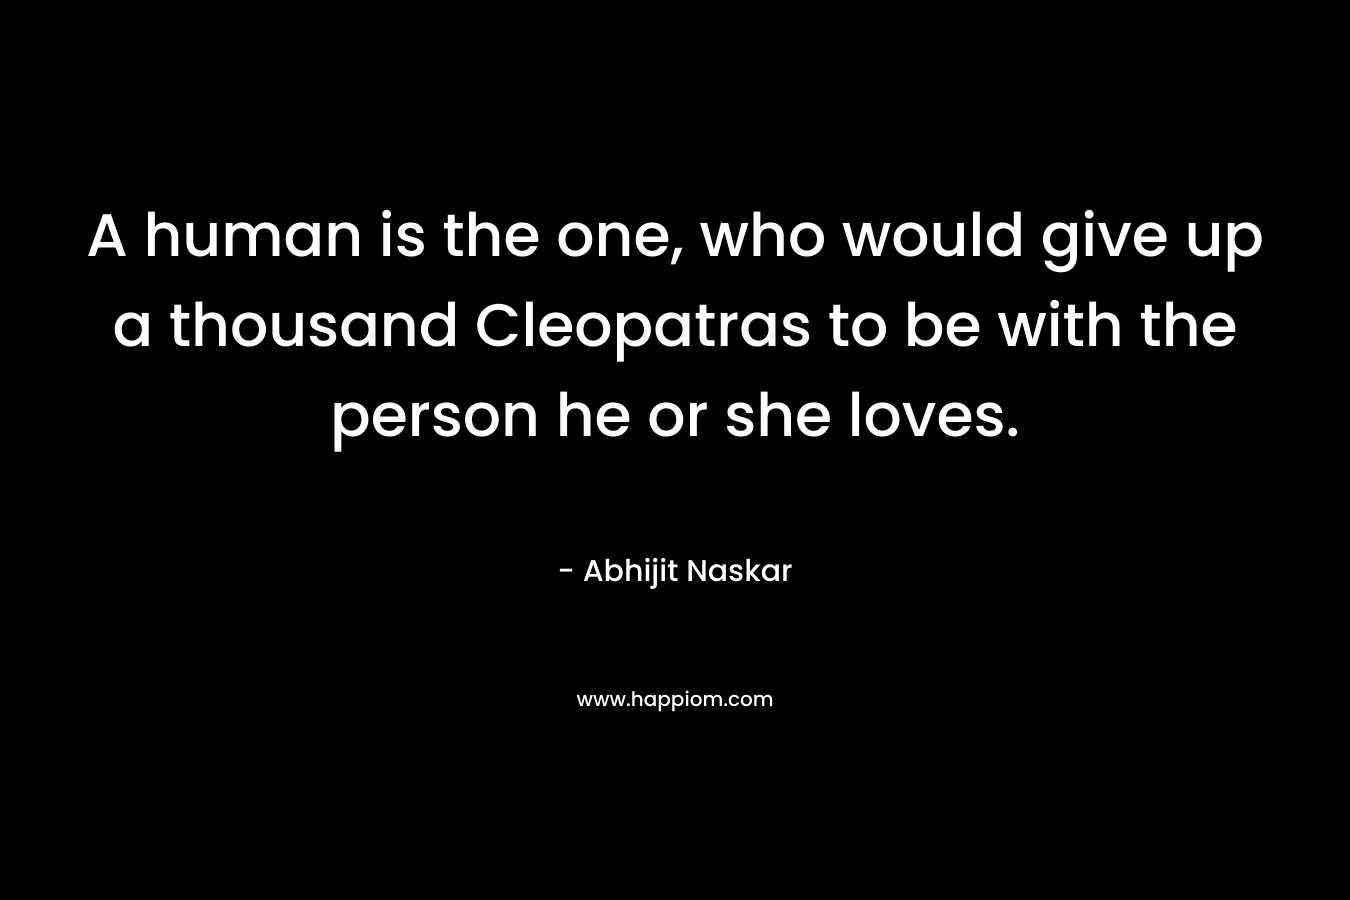 A human is the one, who would give up a thousand Cleopatras to be with the person he or she loves.